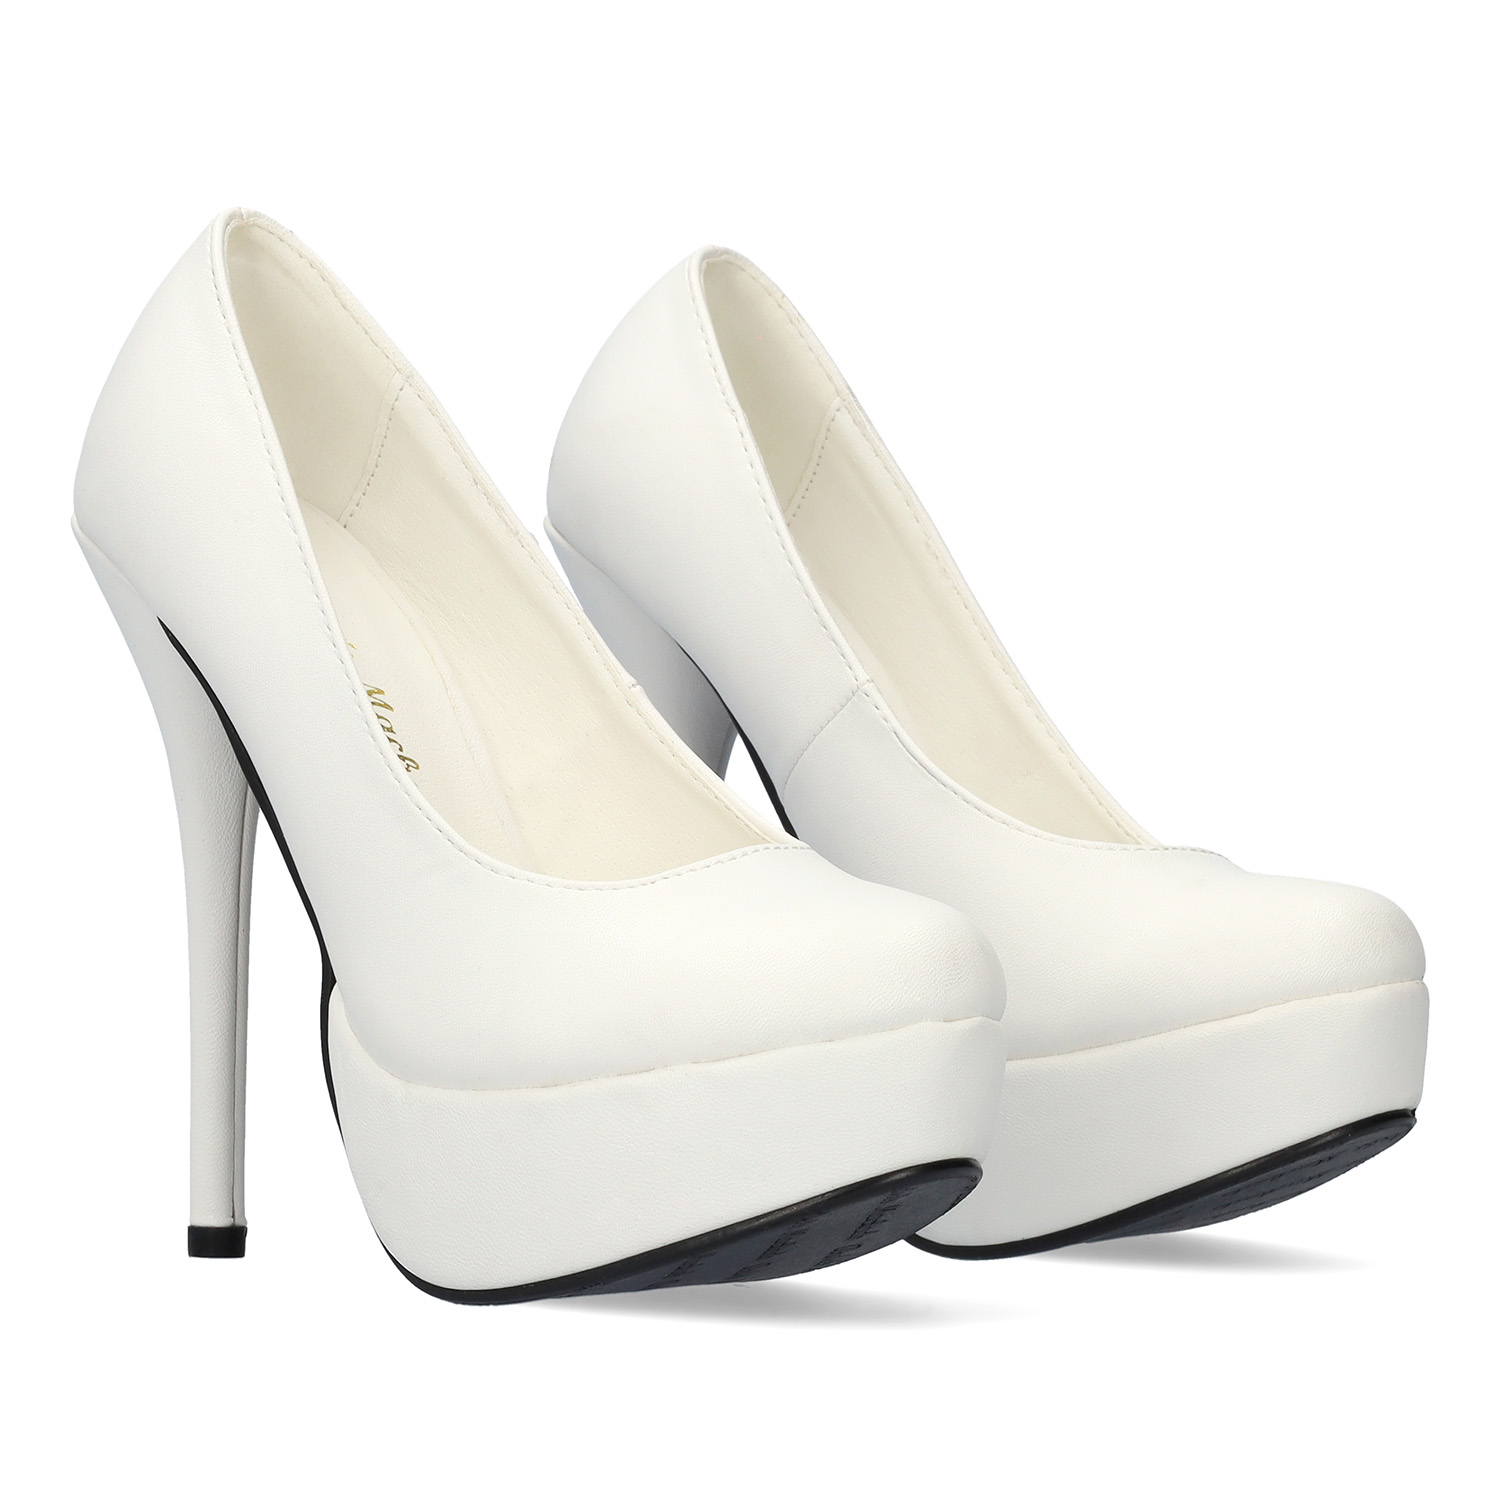 White faux Leather Platform Pumps with Stiletto Heel 